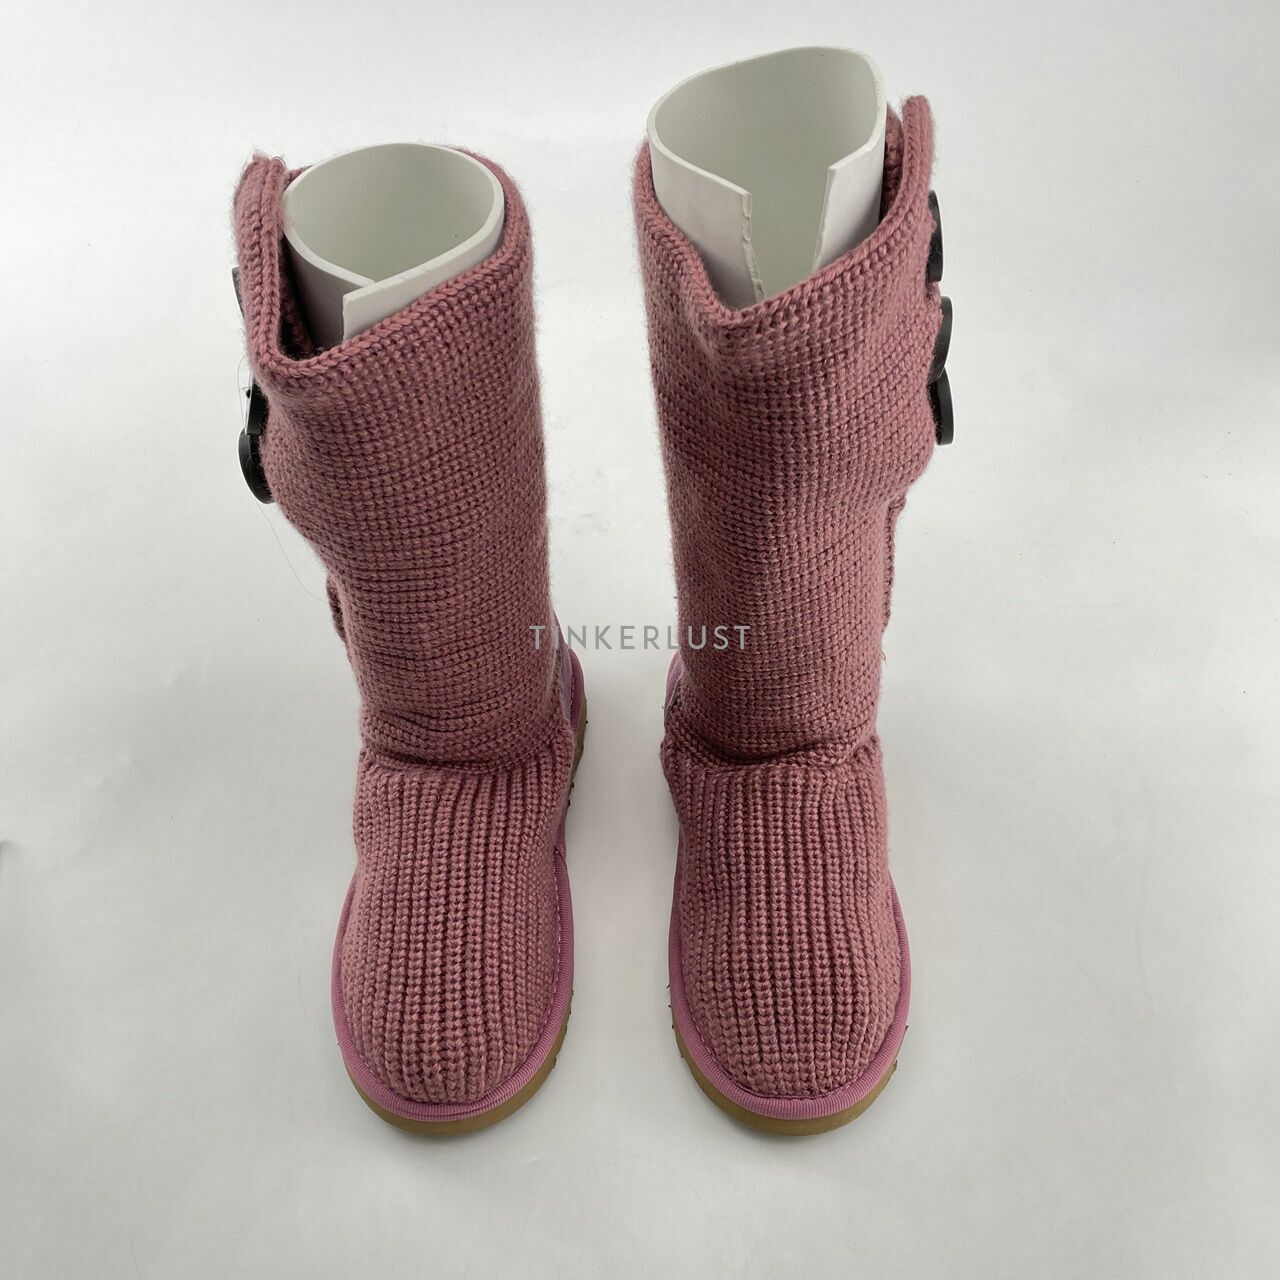 UGG Pink Knit Boots